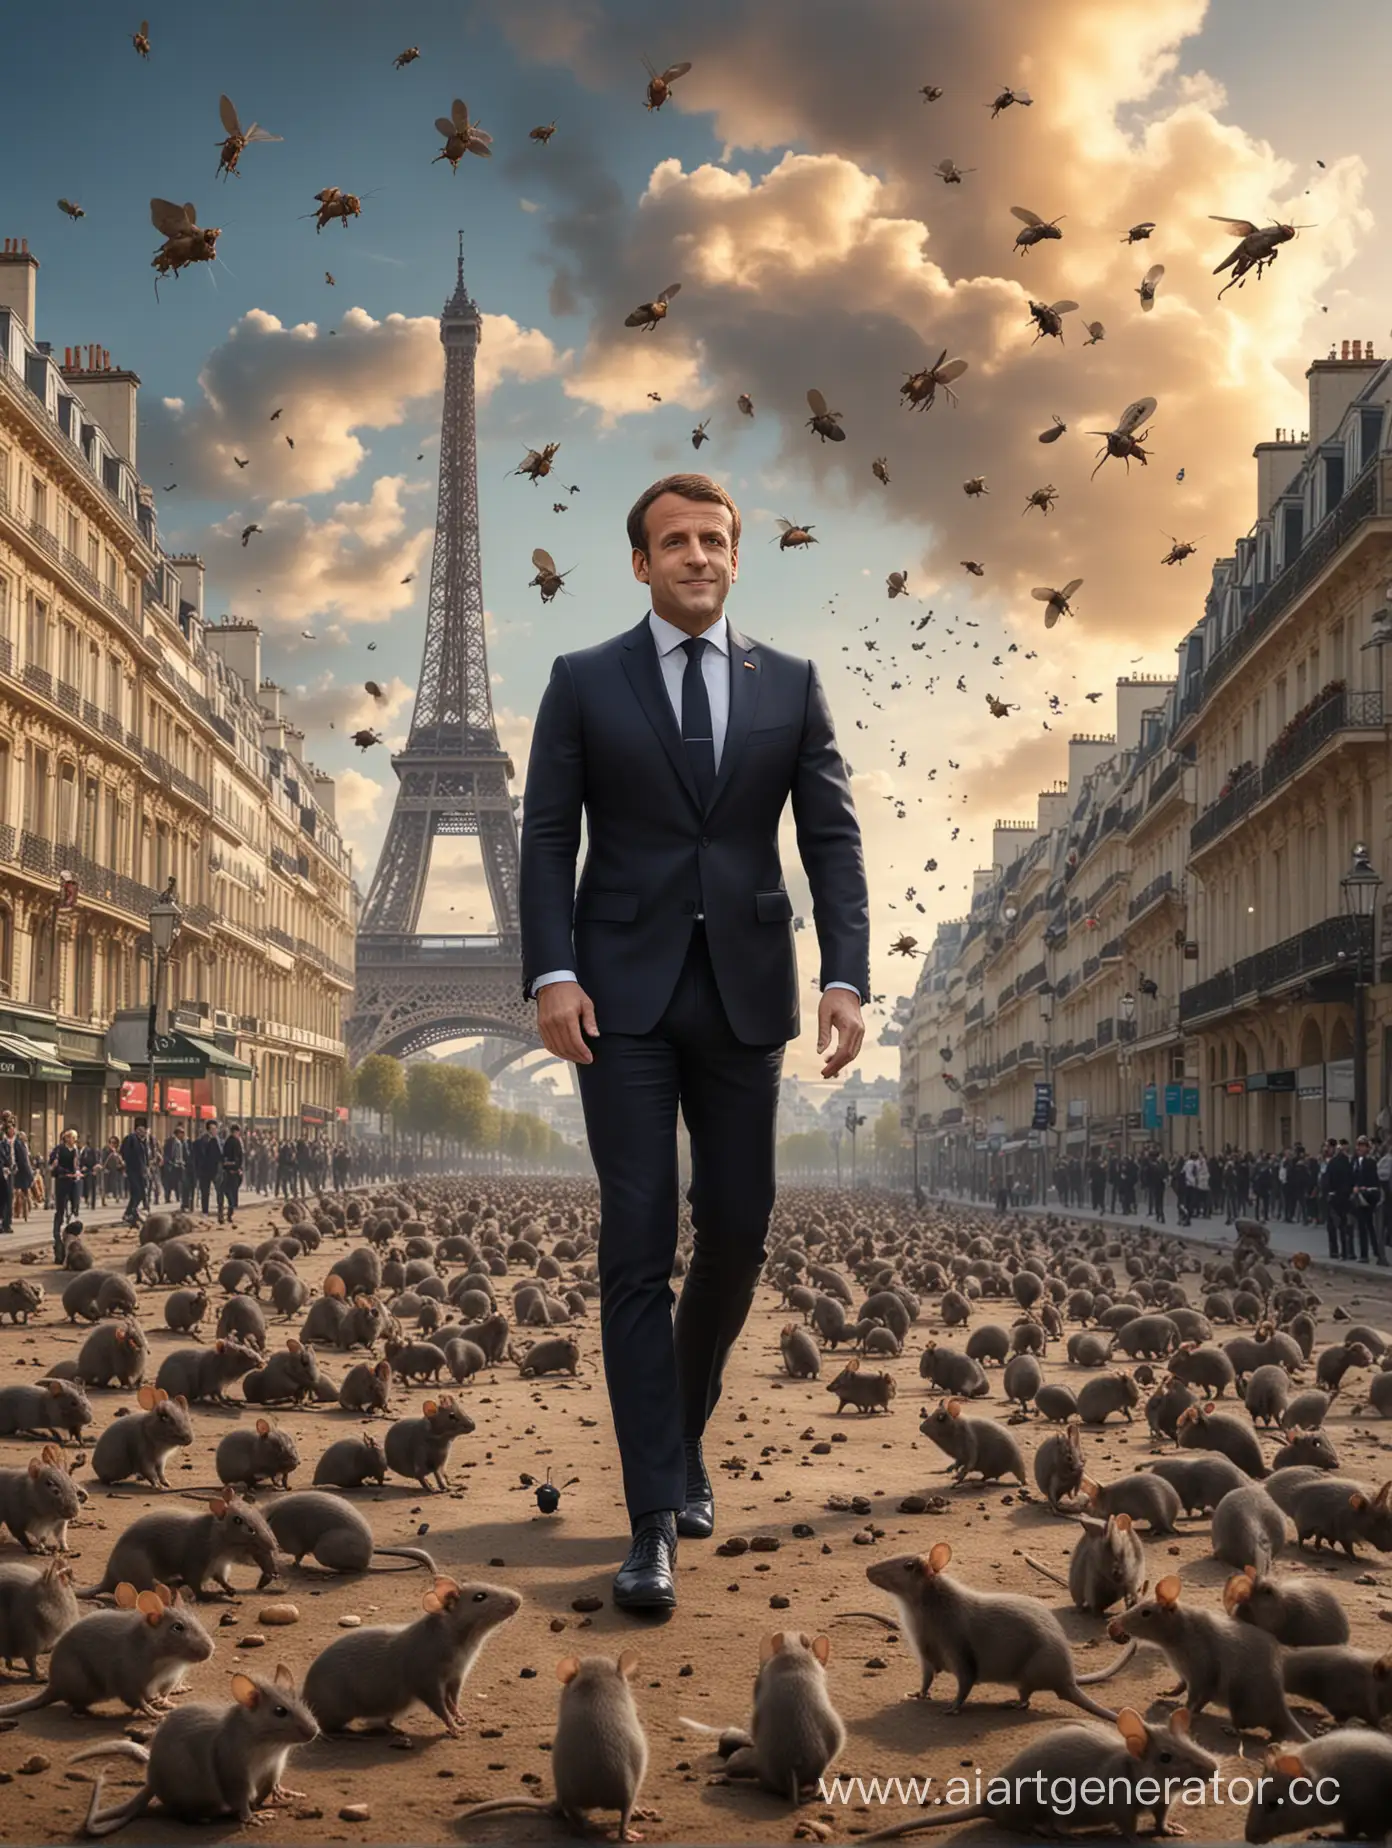 President-Macron-Invites-Parisians-to-Olympics-Amidst-Rocket-Show-Surrounded-by-Pests